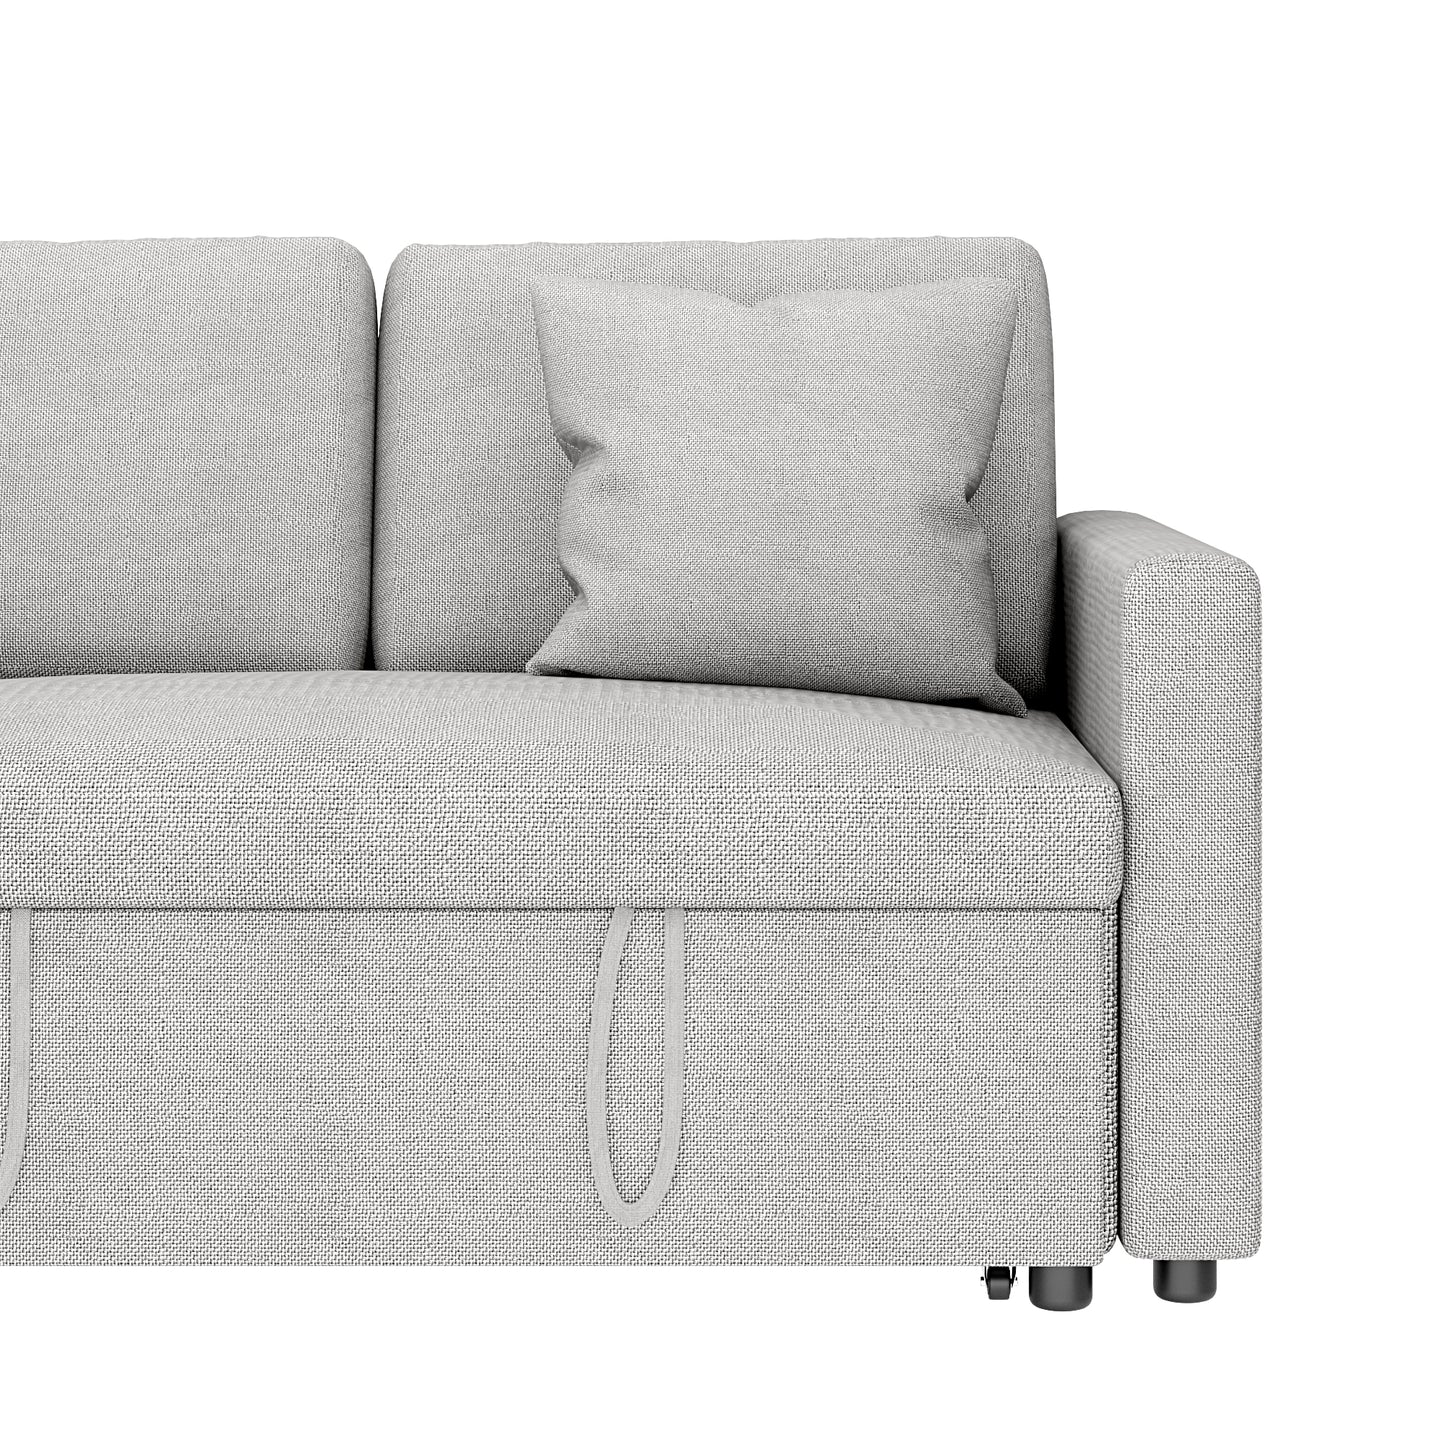 SogesPower 85" Sofa Set with Storage Chaise, Linen Fabric 3 Seater Couch, Light Gray